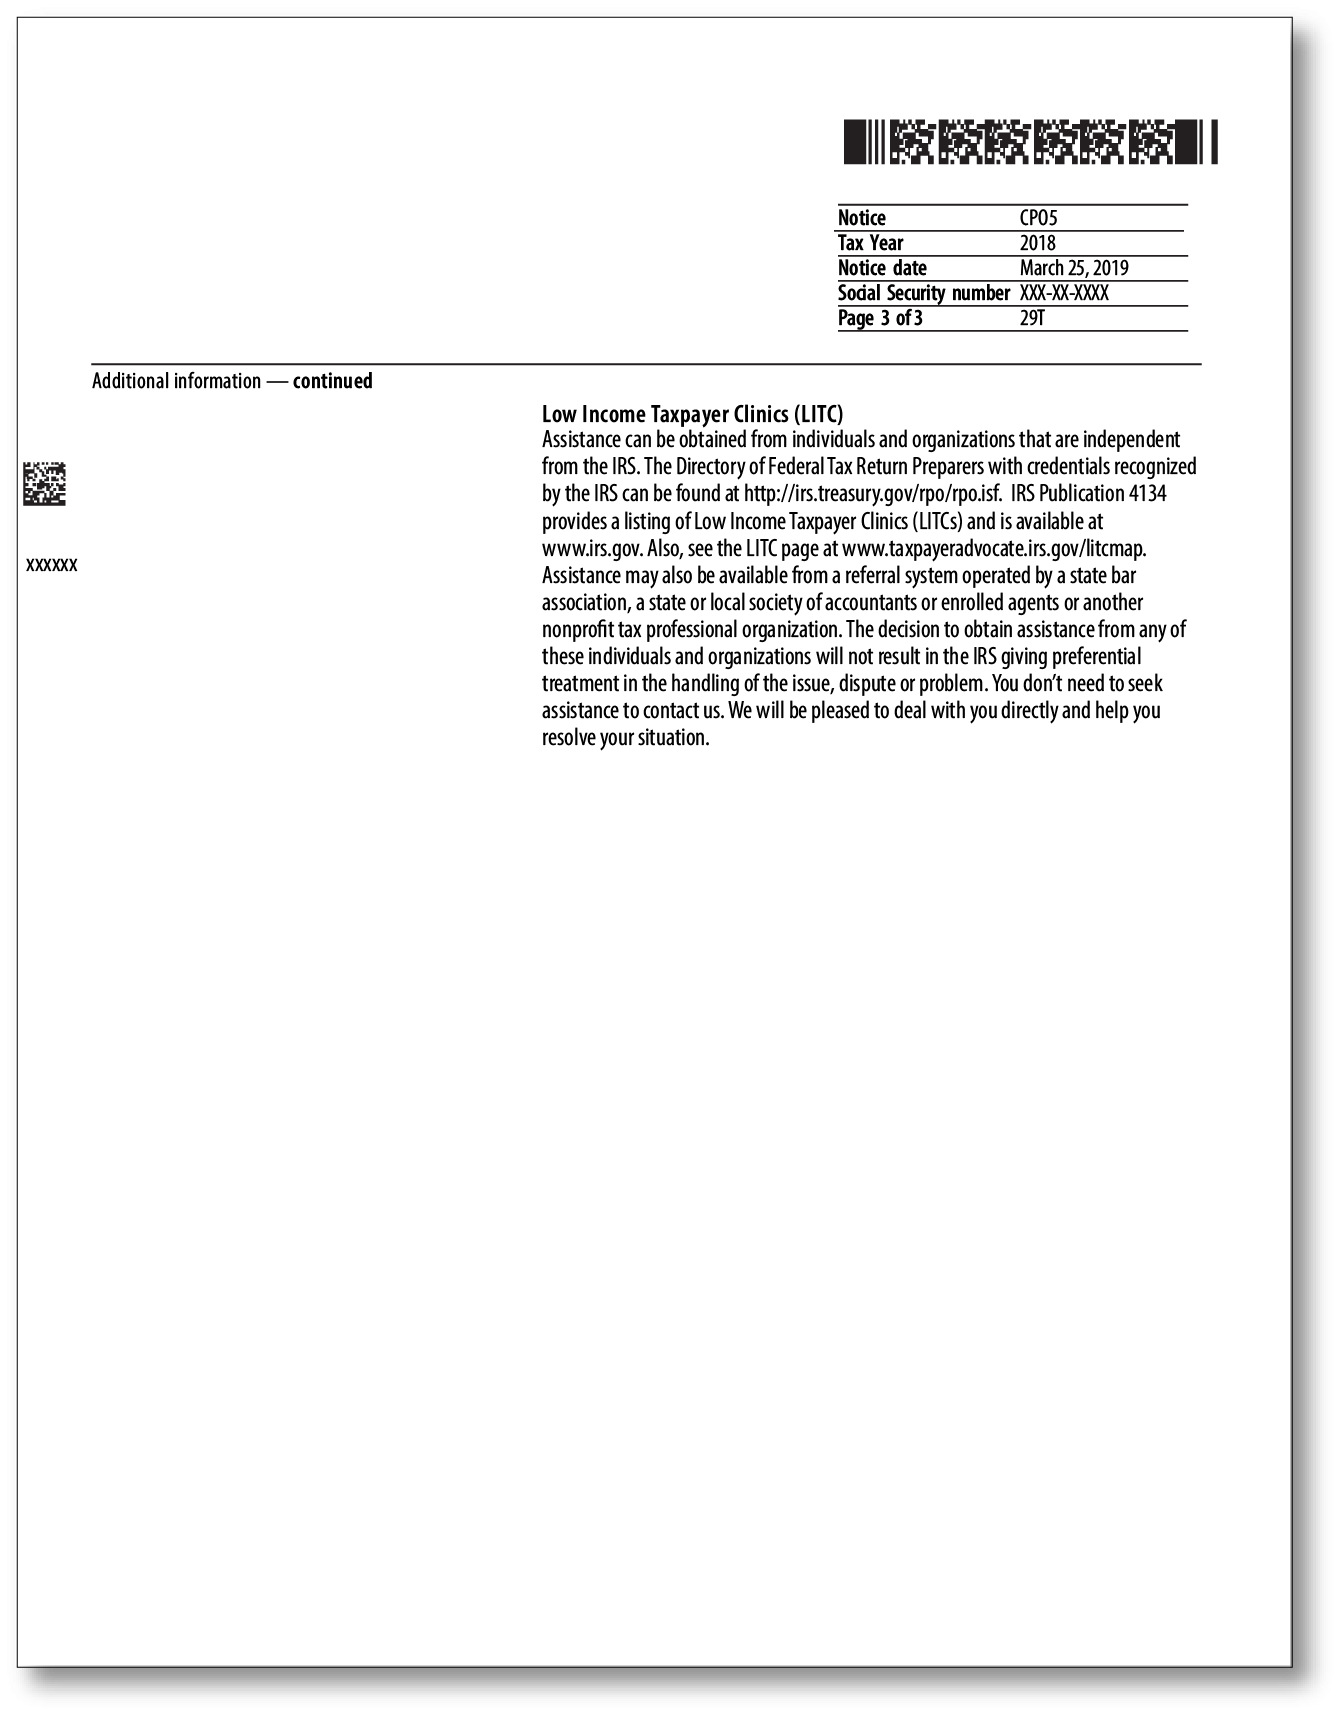 IRS Audit Letter CP05 – Sample 1